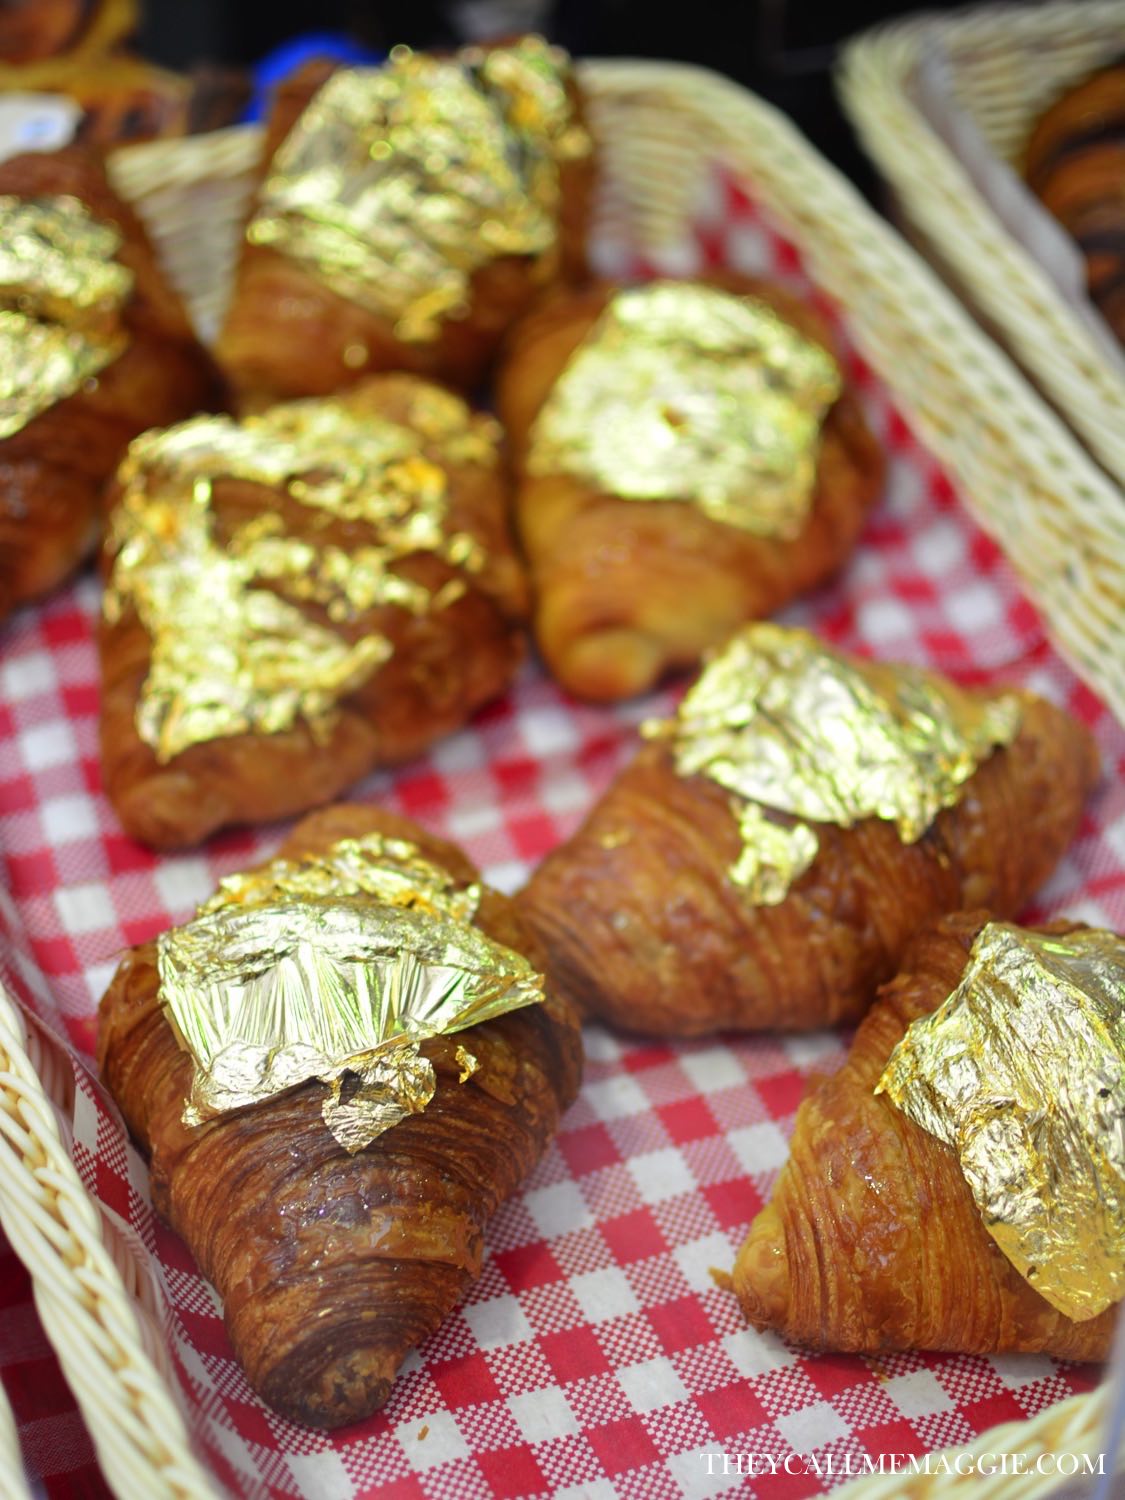  Croissants fit for a queen - these explosive sour lemon croissants, topped with a gold leaf, were created as a special Queen's Birthday edition. 